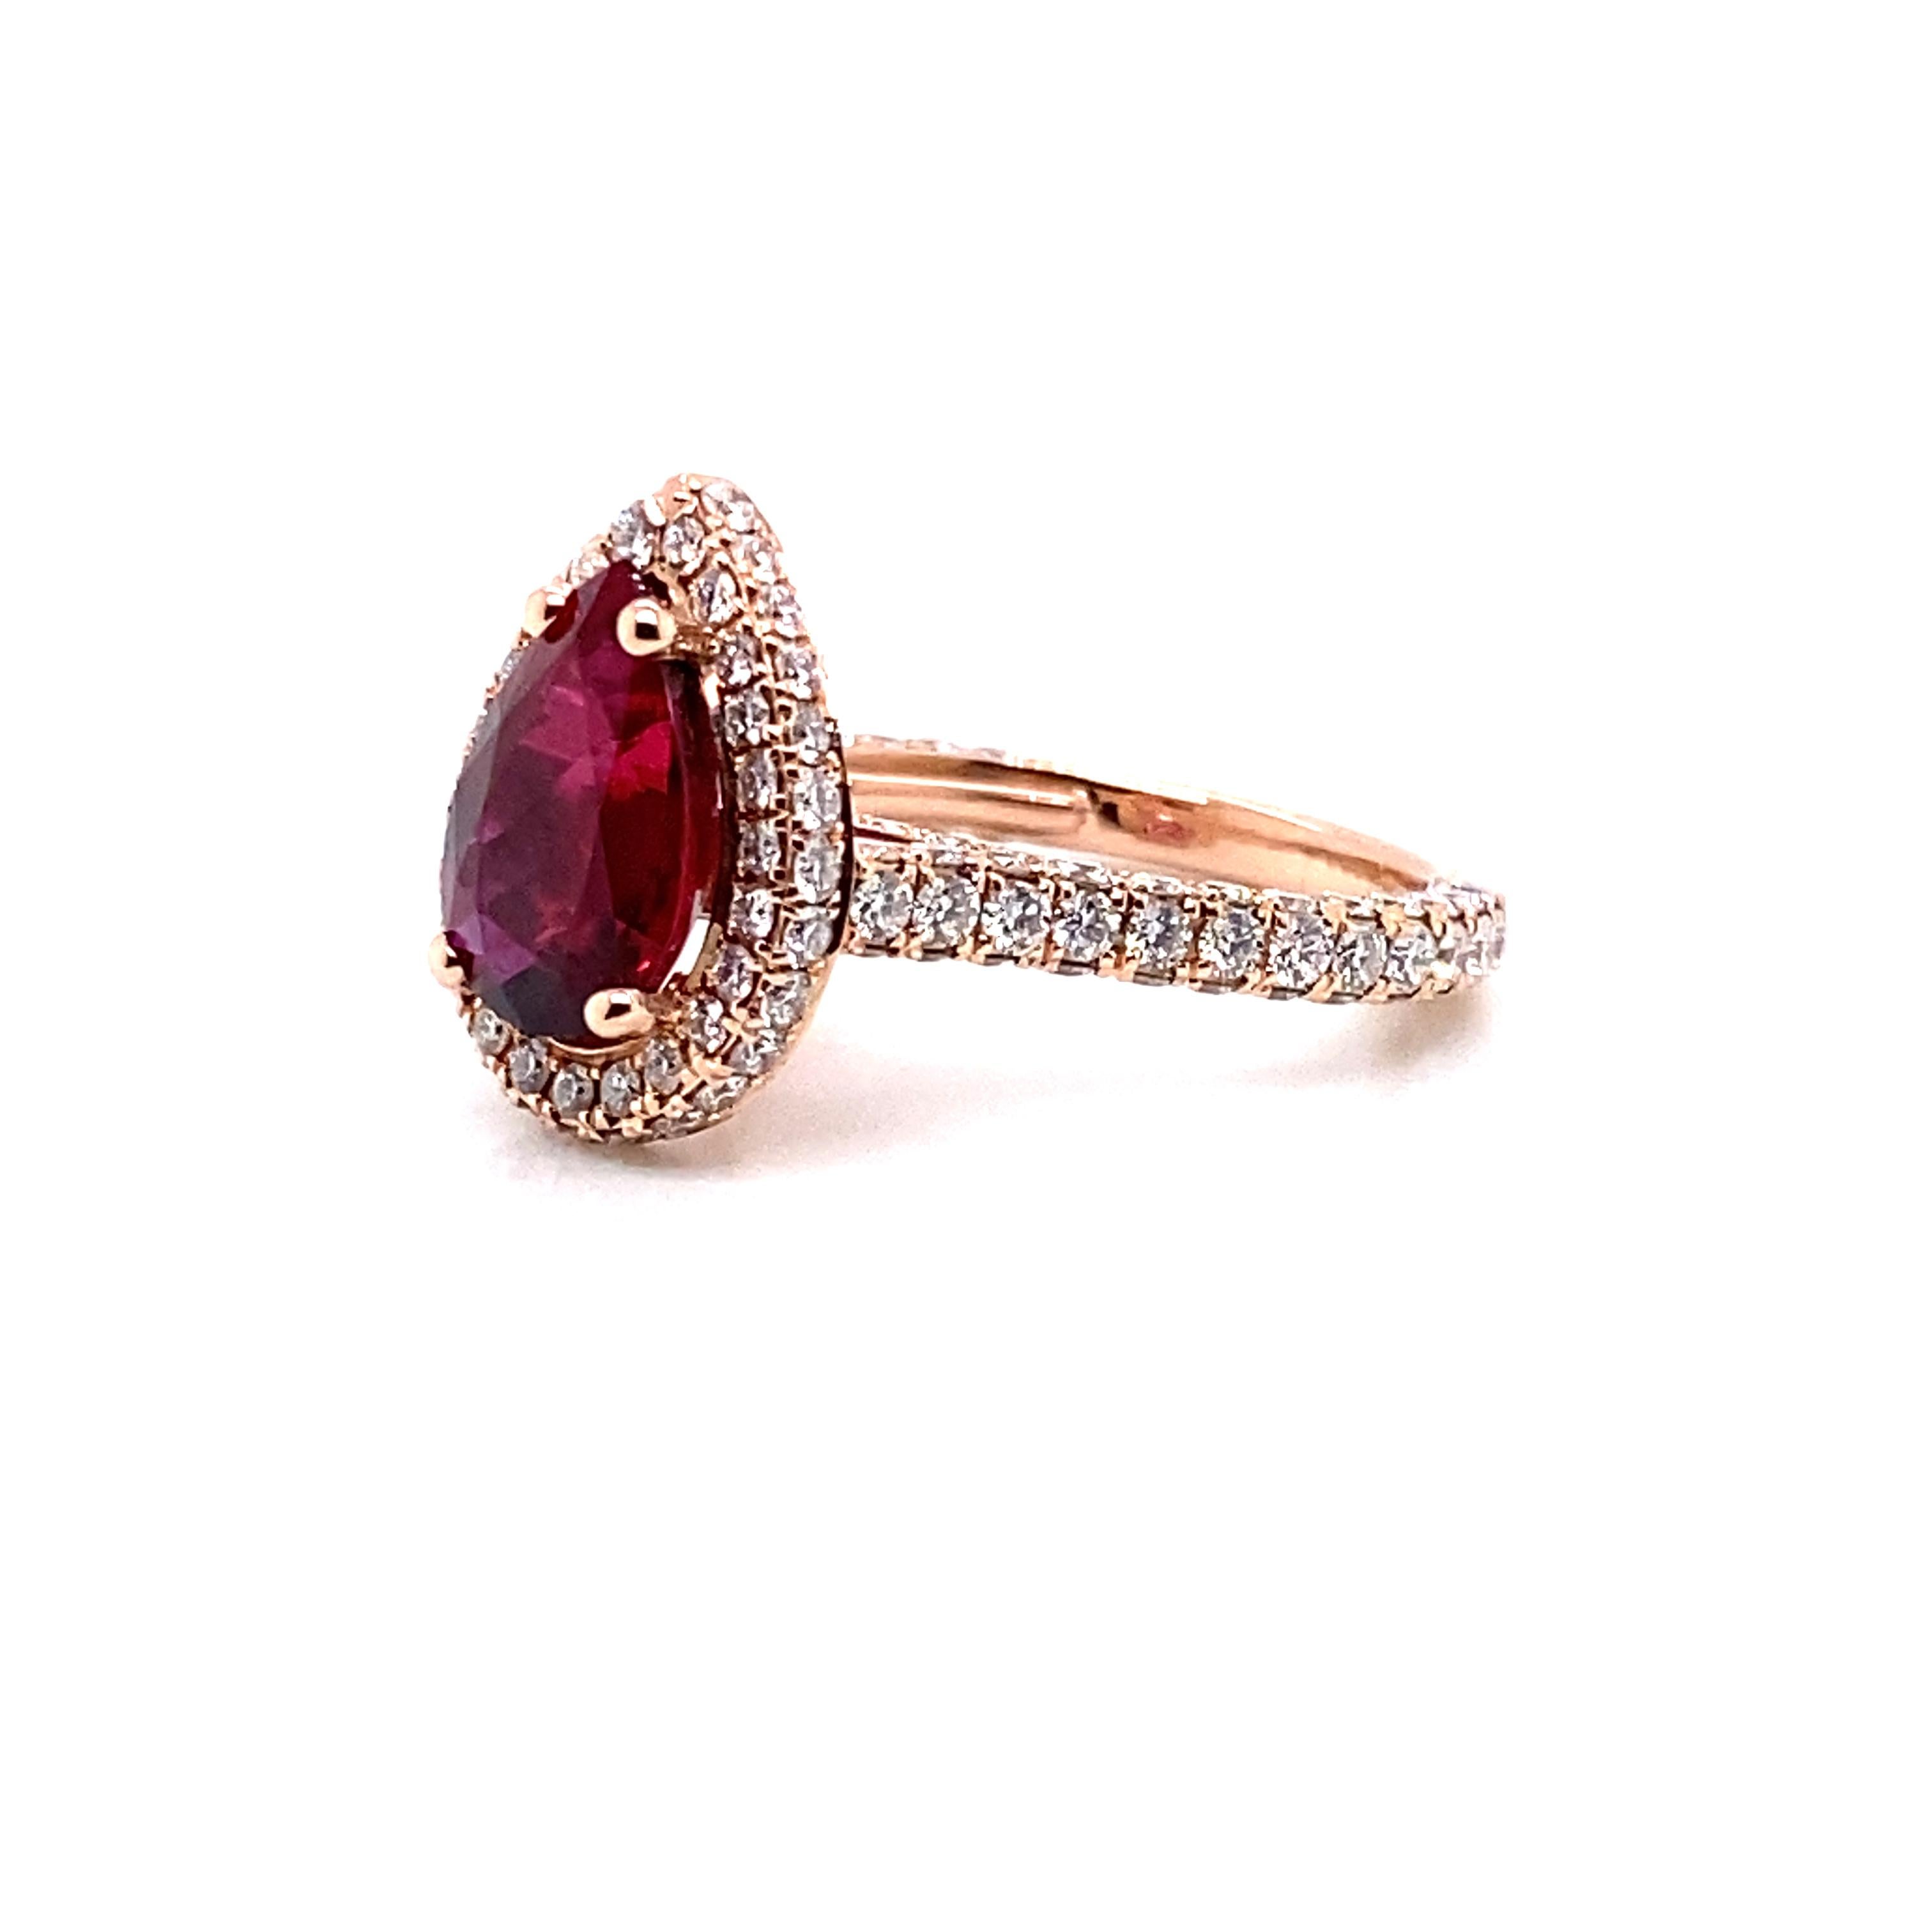 Custom 14K Rose gold Setting
1.72ct Round Brilliant Diamonds
2.52ct Pear Shape Ruby
GIA Certificate number: 6177451527